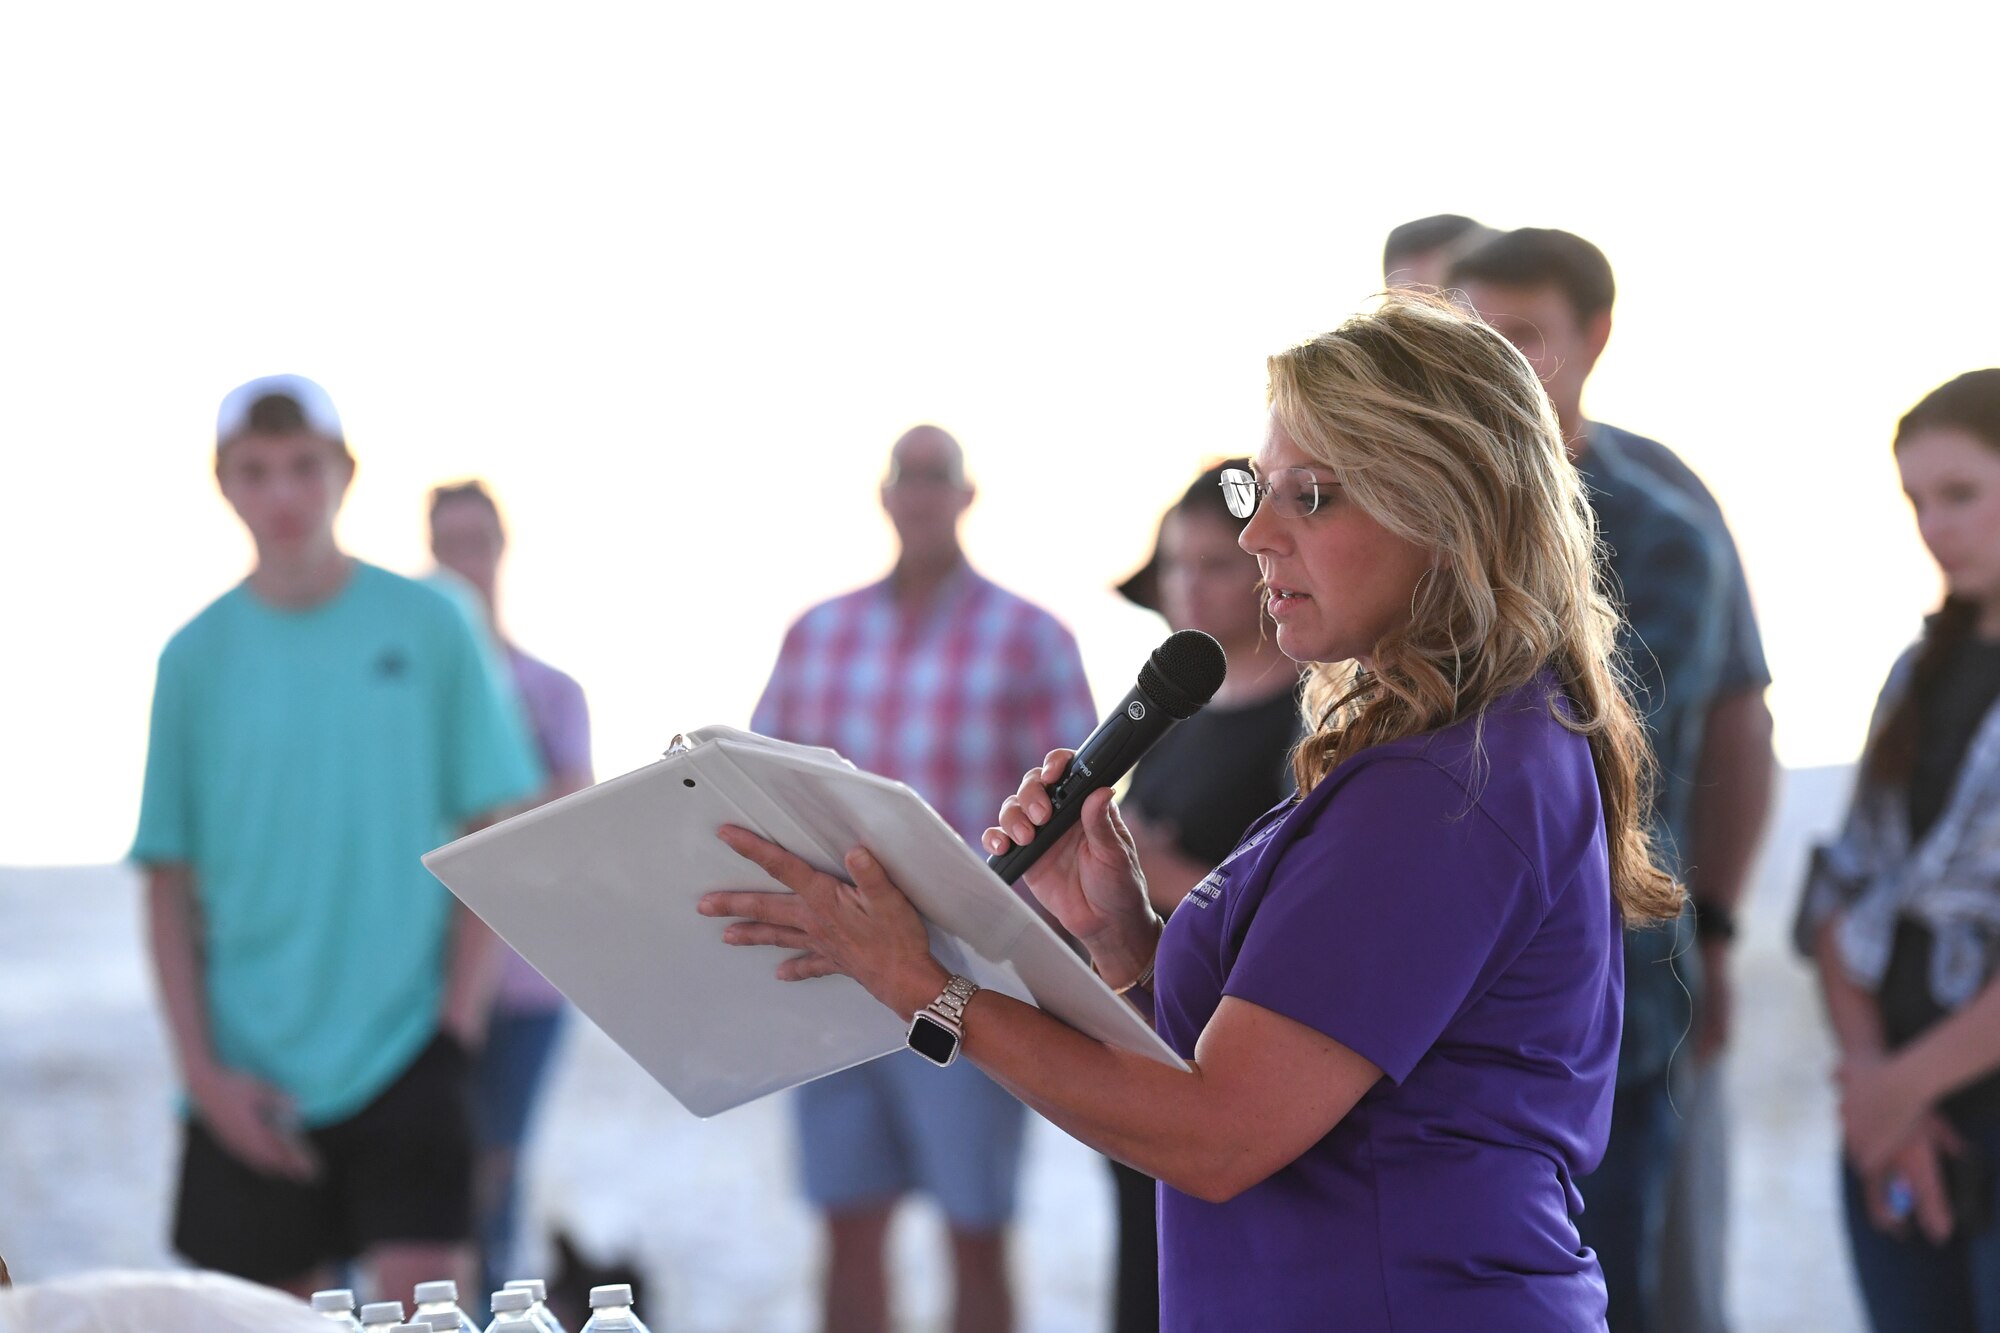 Holly Fisher, 81st Force Support Squadron work-life specialist, delivers remarks during the Air Force Families Forever Fallen Hero Sky Lantern Lighting on the Biloxi Beach, Mississippi, Sept. 24, 2021. The event, hosted by Keesler Air Force Base, included eco-friendly sky lanterns released in honor of fallen heroes. (U.S. Air Force photo by Kemberly Groue)